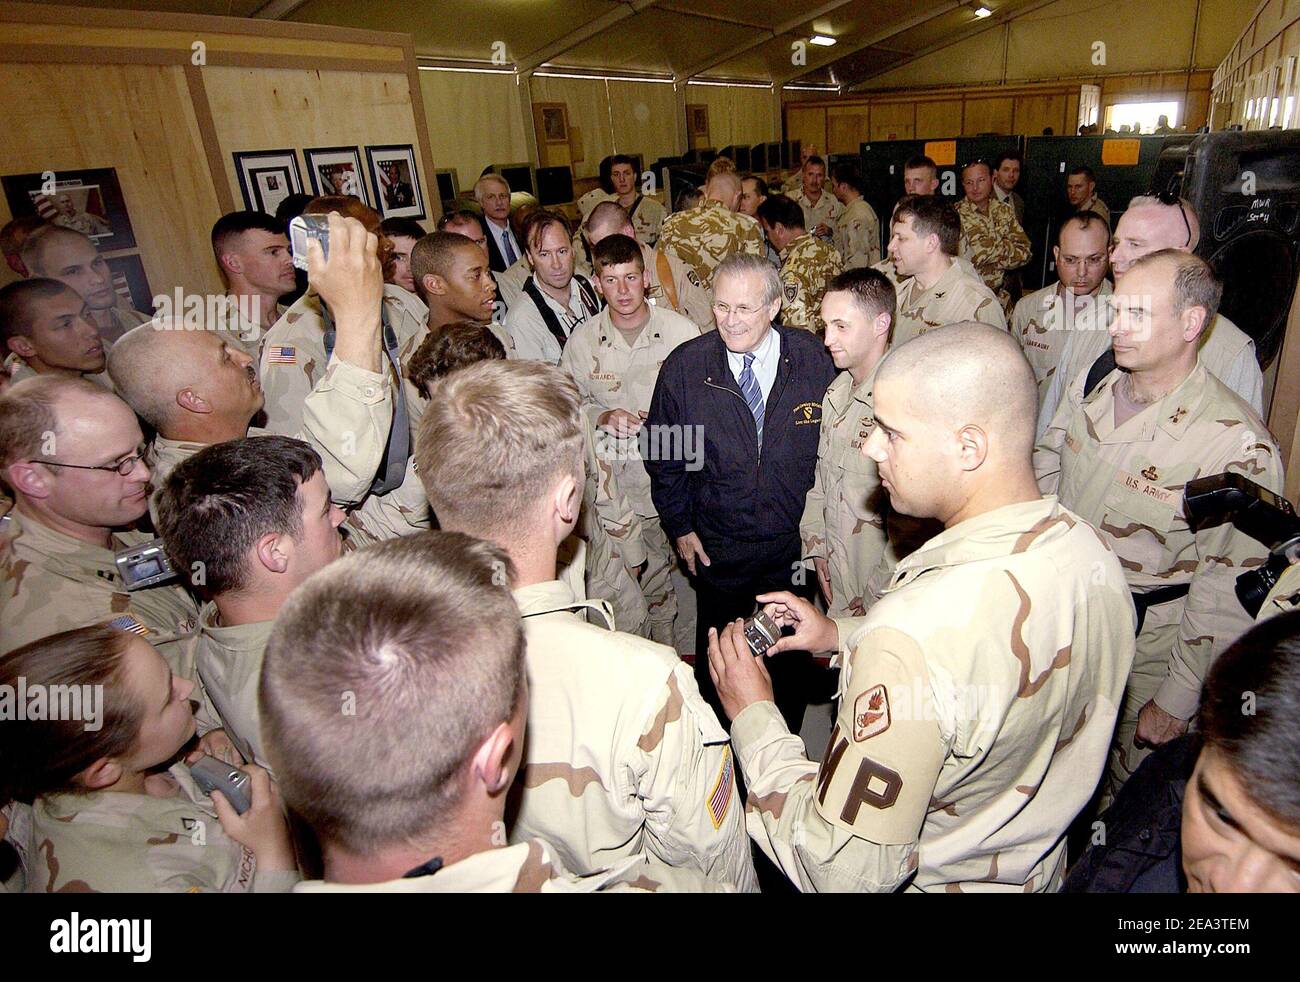 Secretary of Defense Donald H. Rumsfeld is surrounded by troops as he poses with them for photos after a town hall meeting with U.S. and coalition forces in Kandahar, Afghanistan, on April 13, 2005. Rumsfeld is in Afghanistan to visit with U.S. and coalition forces and to meet with key government officials. DoD photo by Tech. Sgt. Cherie A. Thurlby, U.S. Air Force. Photo by DOD/ABACA. Stock Photo